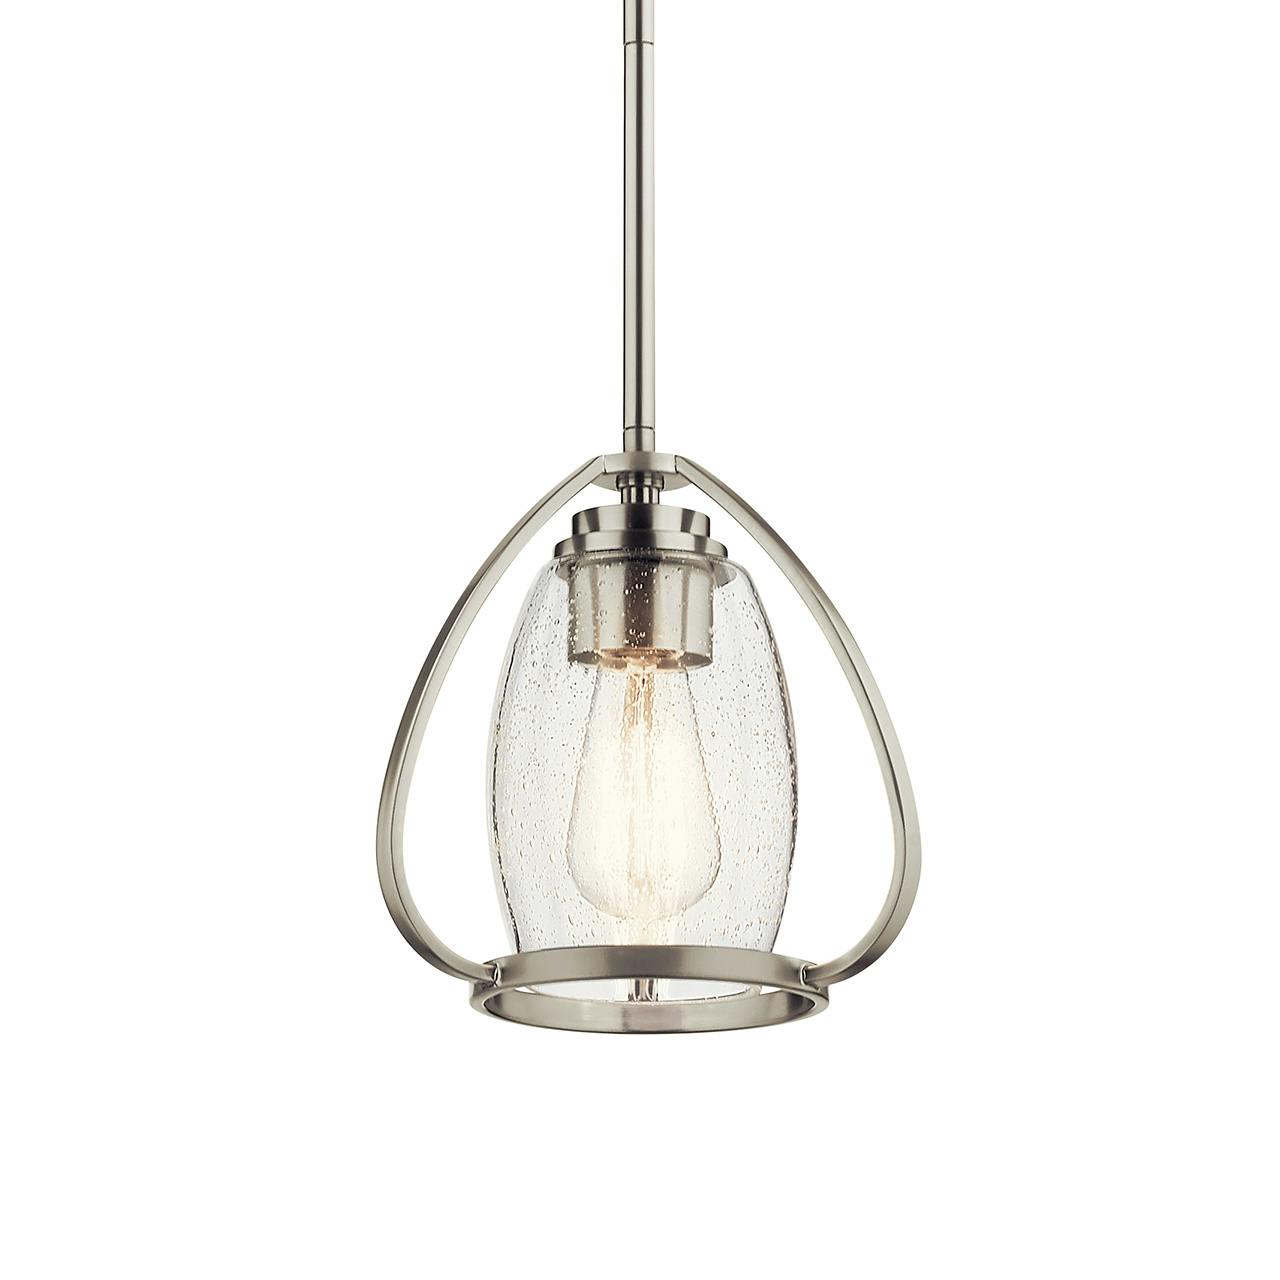 Tuscany 1 Light Mini Pendant in Nickel without the canopy on a white background